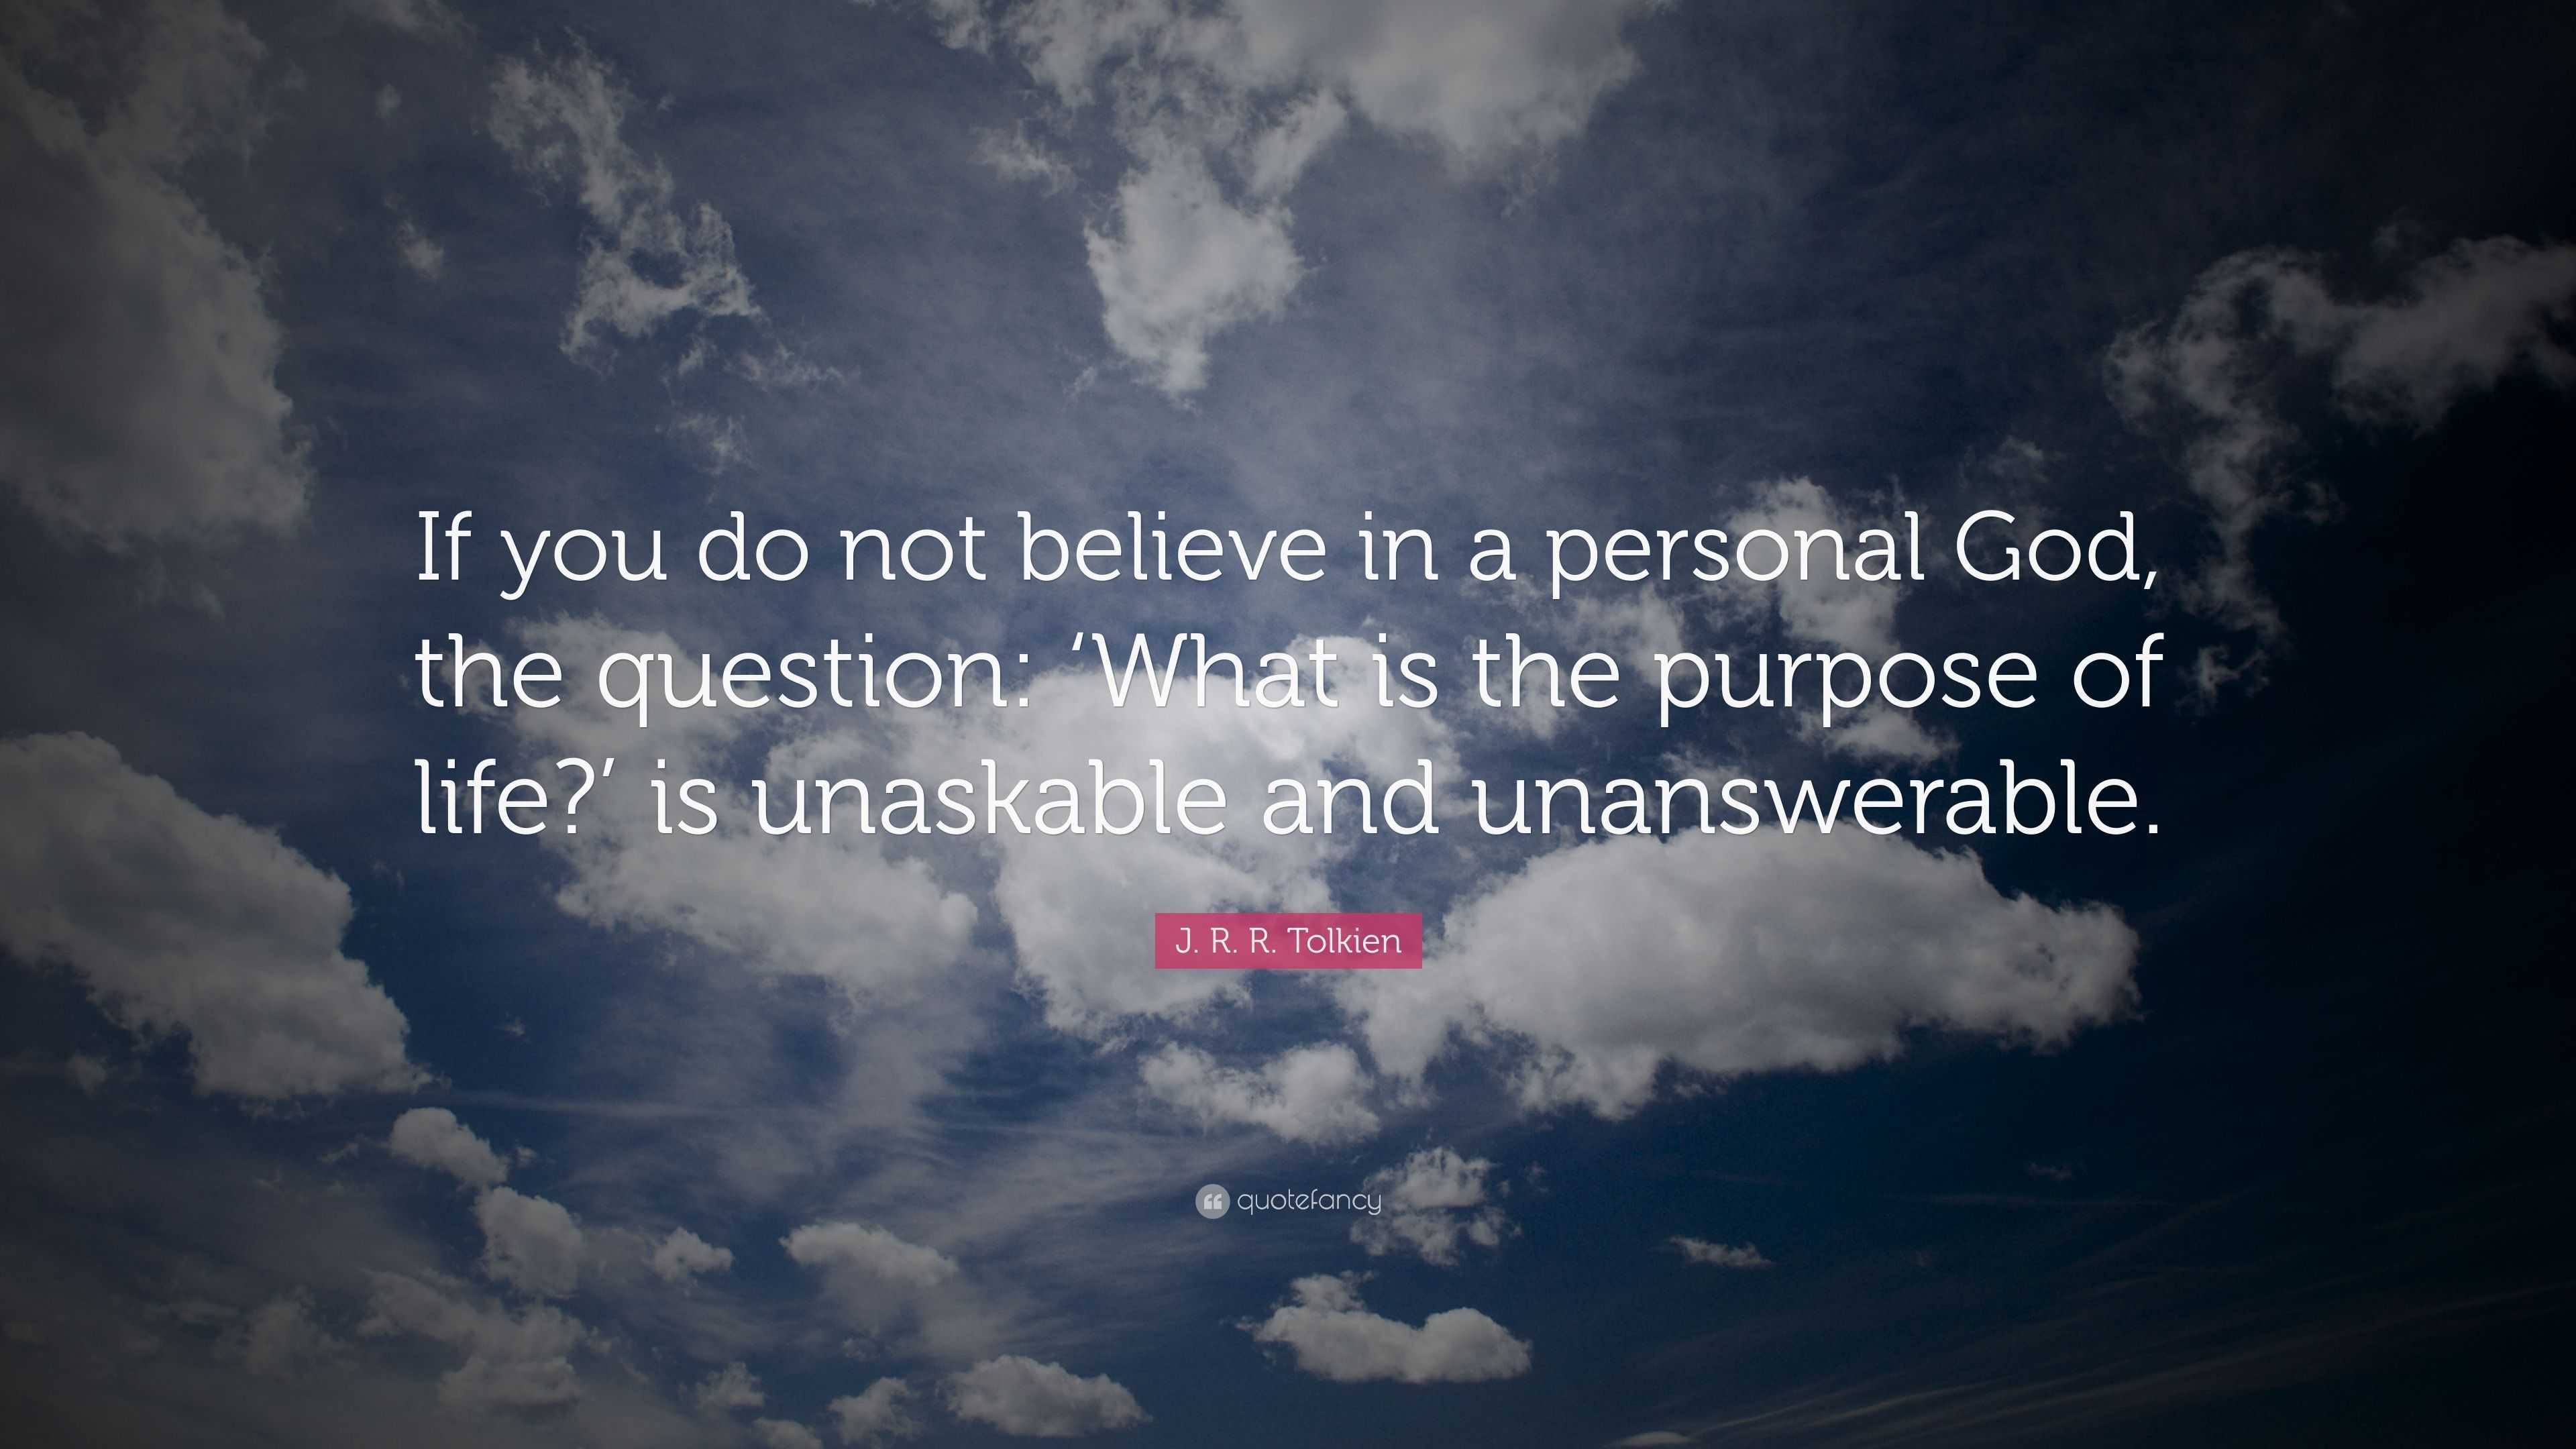 J. R. R. Tolkien Quote: “If you do not believe in a personal God, the ...